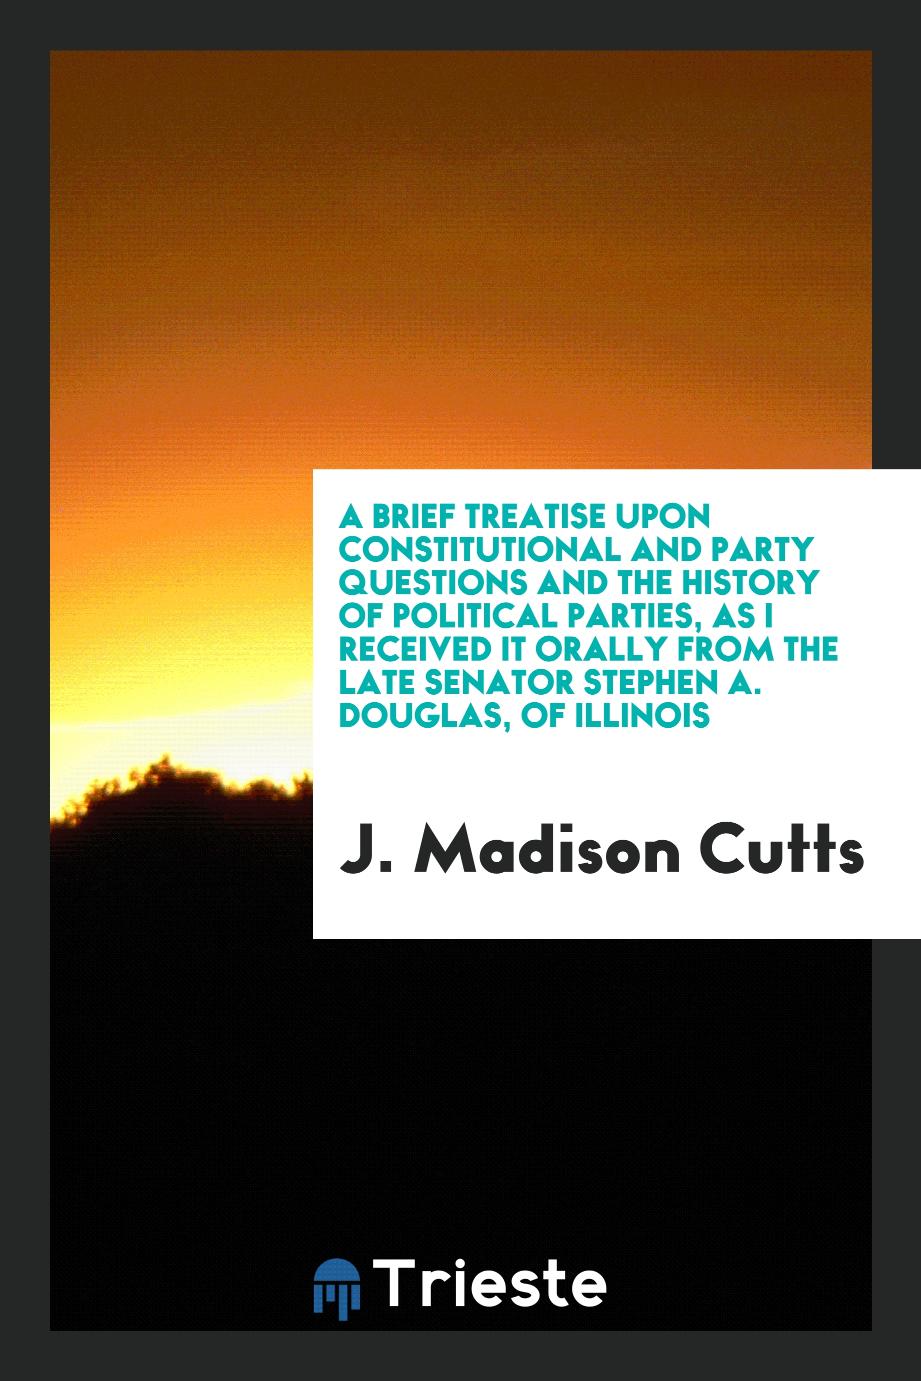 A Brief Treatise upon Constitutional and Party Questions and the History of Political Parties, as I Received It Orally from the Late Senator Stephen A. Douglas, of Illinois